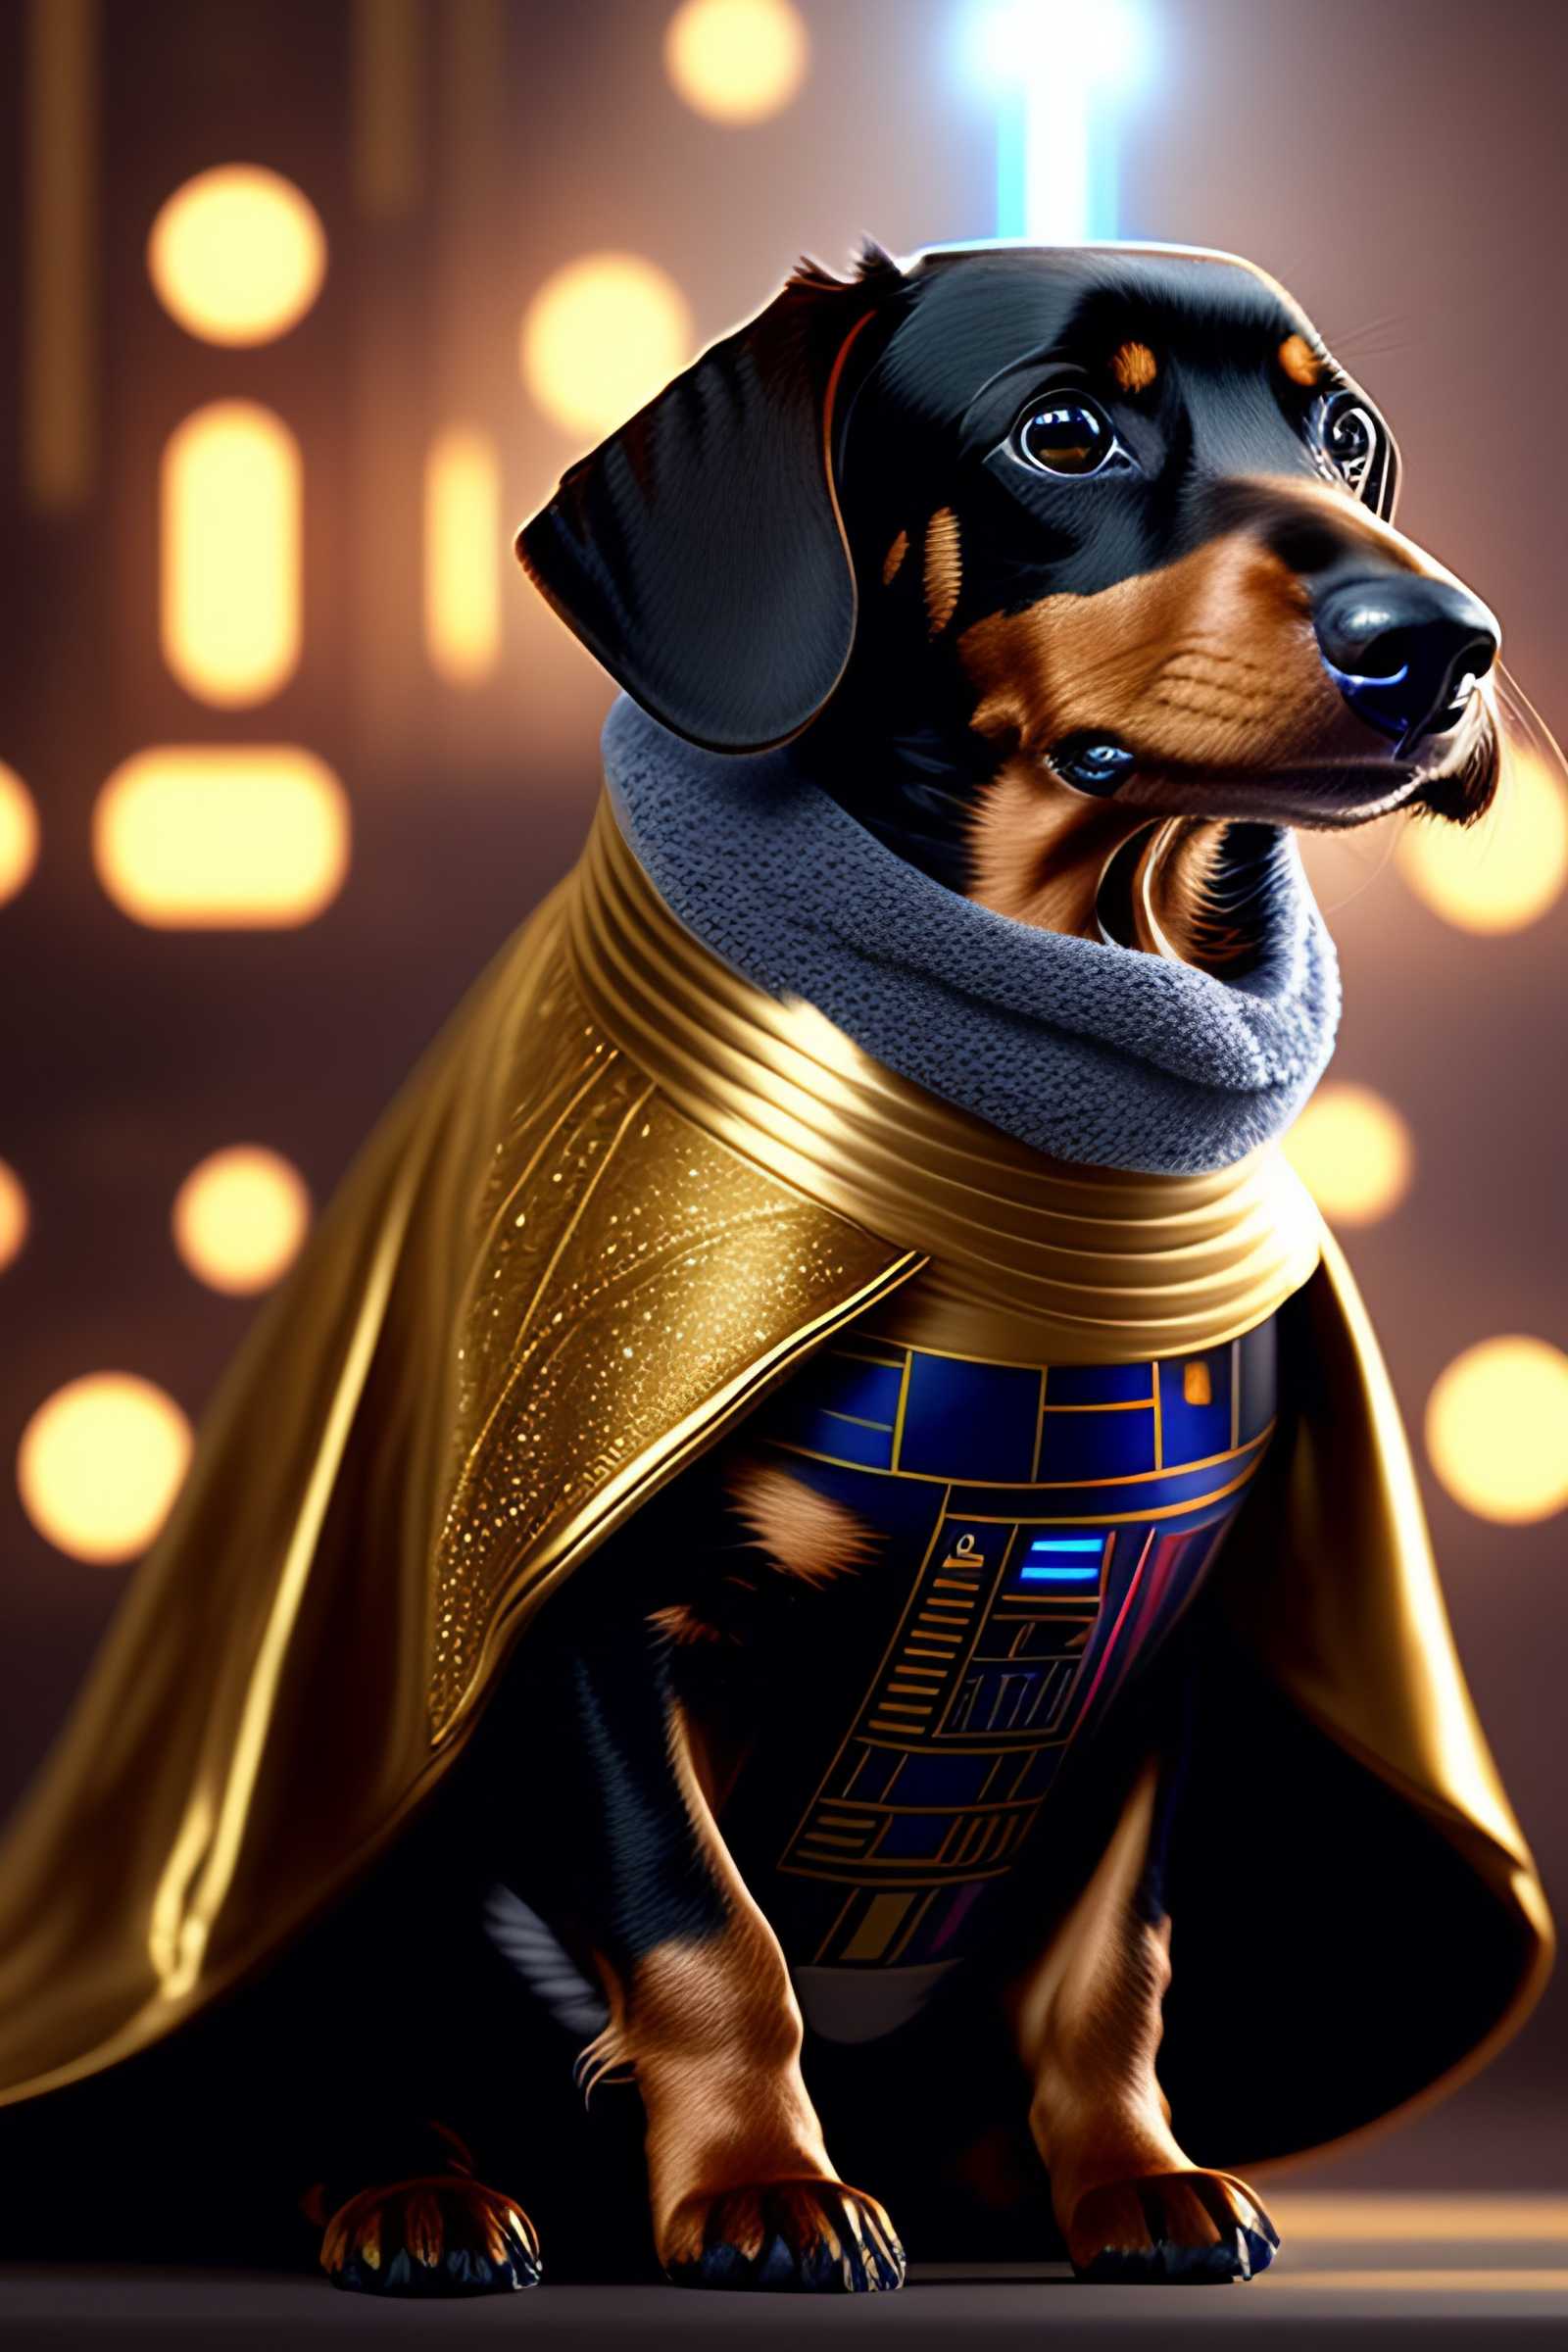 Star Wars scene artificial intelligence: a small black and brown dachshund wearing a golden Jedi knight cape holding a blue lightsaber in its left paw, with R2D2 and 3PO in the background, art station trends, concept art, highly detailed, complex, sharp focus, digital art, 8k